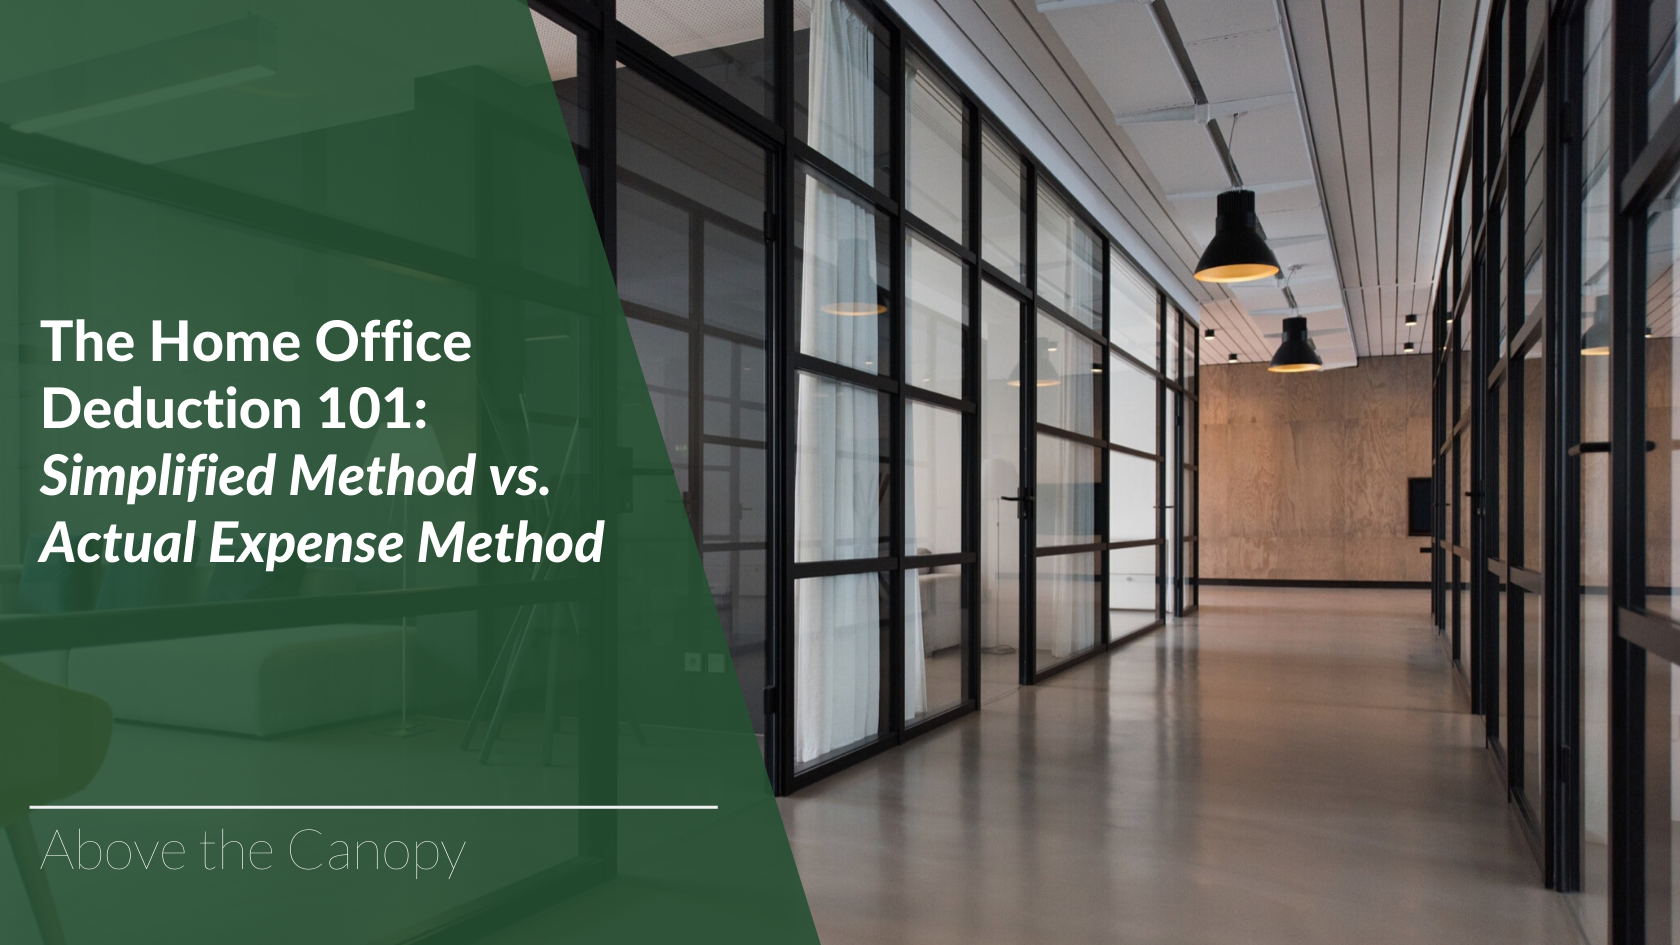 The Home Office Deduction 101: Simplified Method Vs. Actual Expense Method